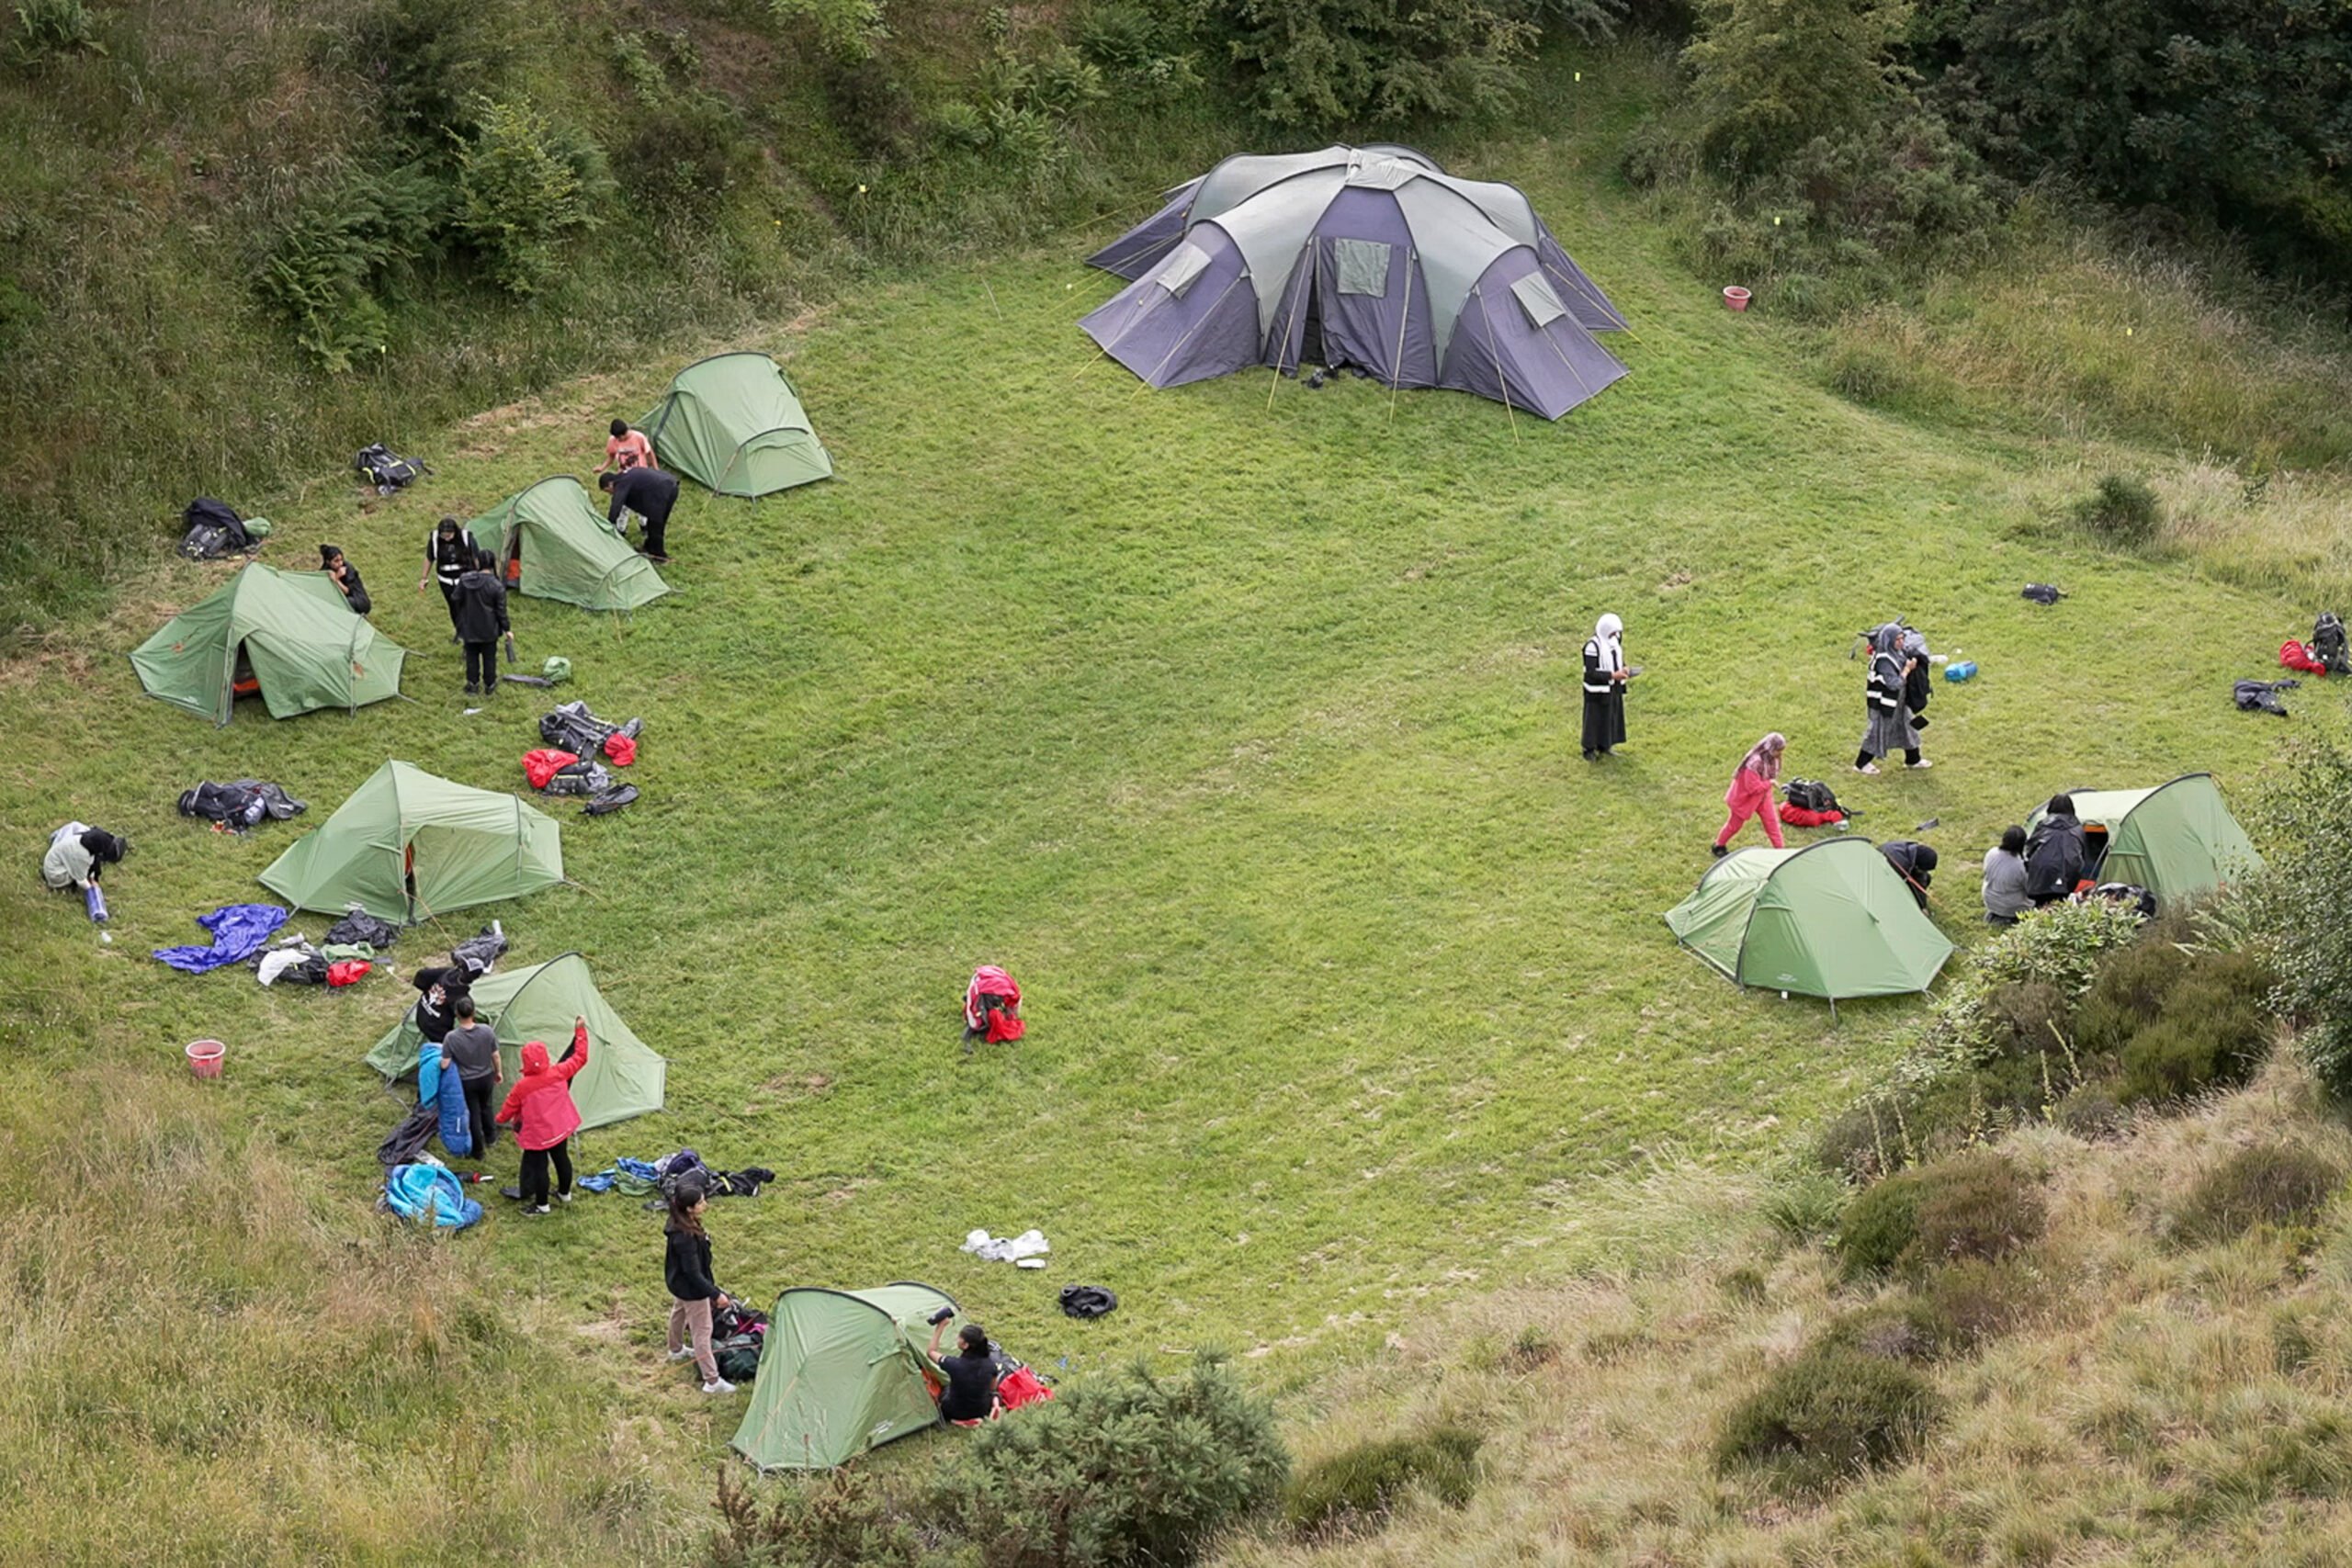 An aerial shot of a campsite. The tents are on grass, in a circle with a large space in the middle. There are young people next to their tents setting them up.